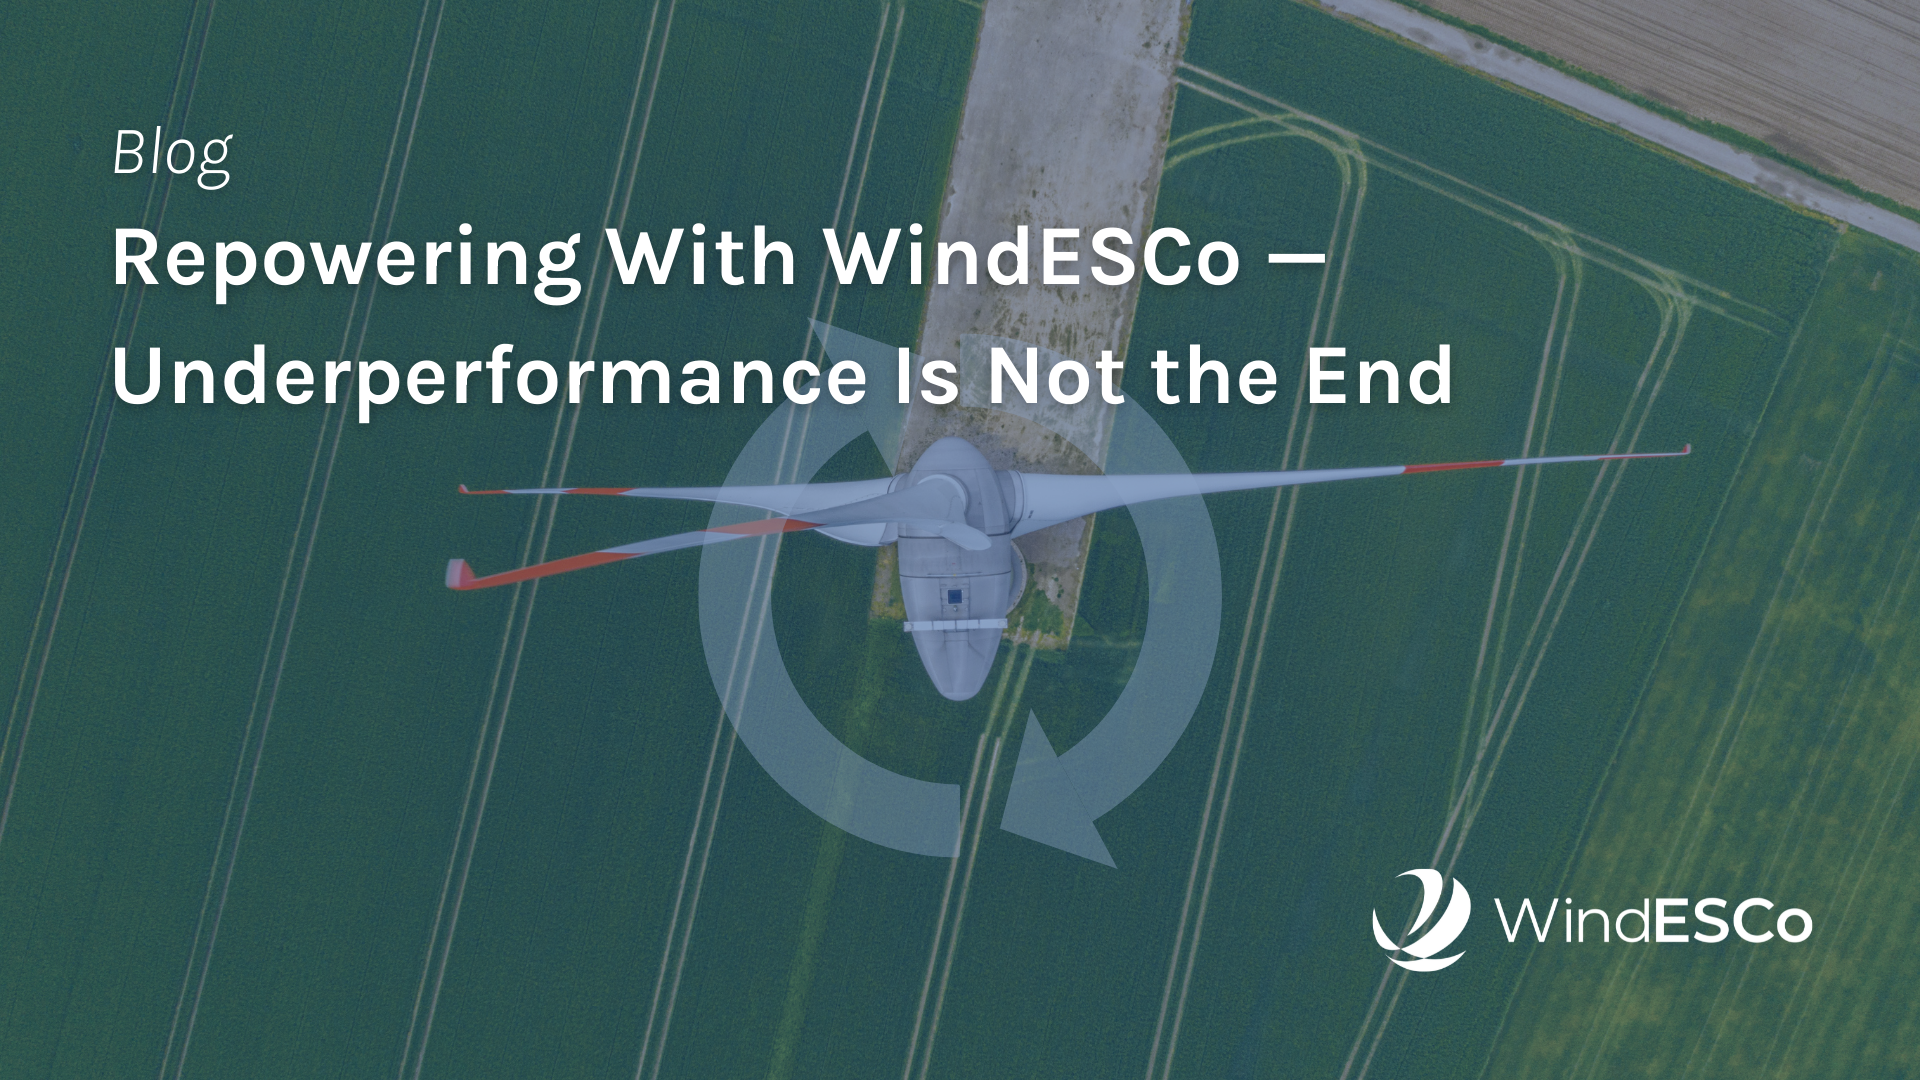 Repowering with WindESCo — Underperformance Is Not the End